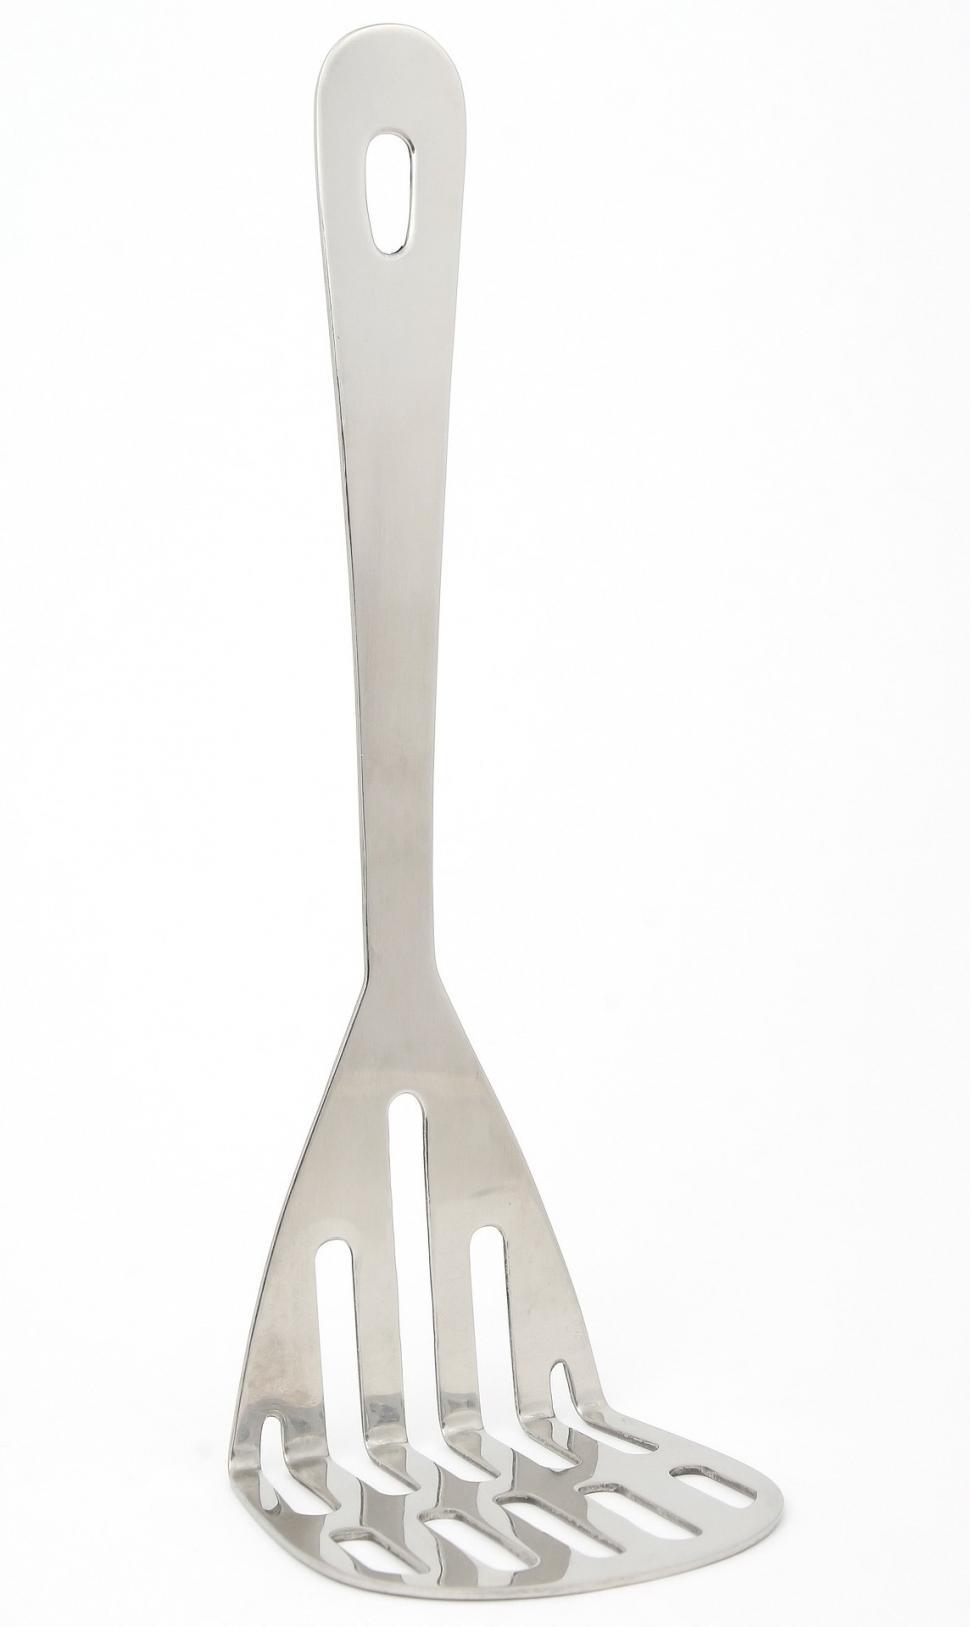 Free Image of Spatula With Four Utensils Attached 